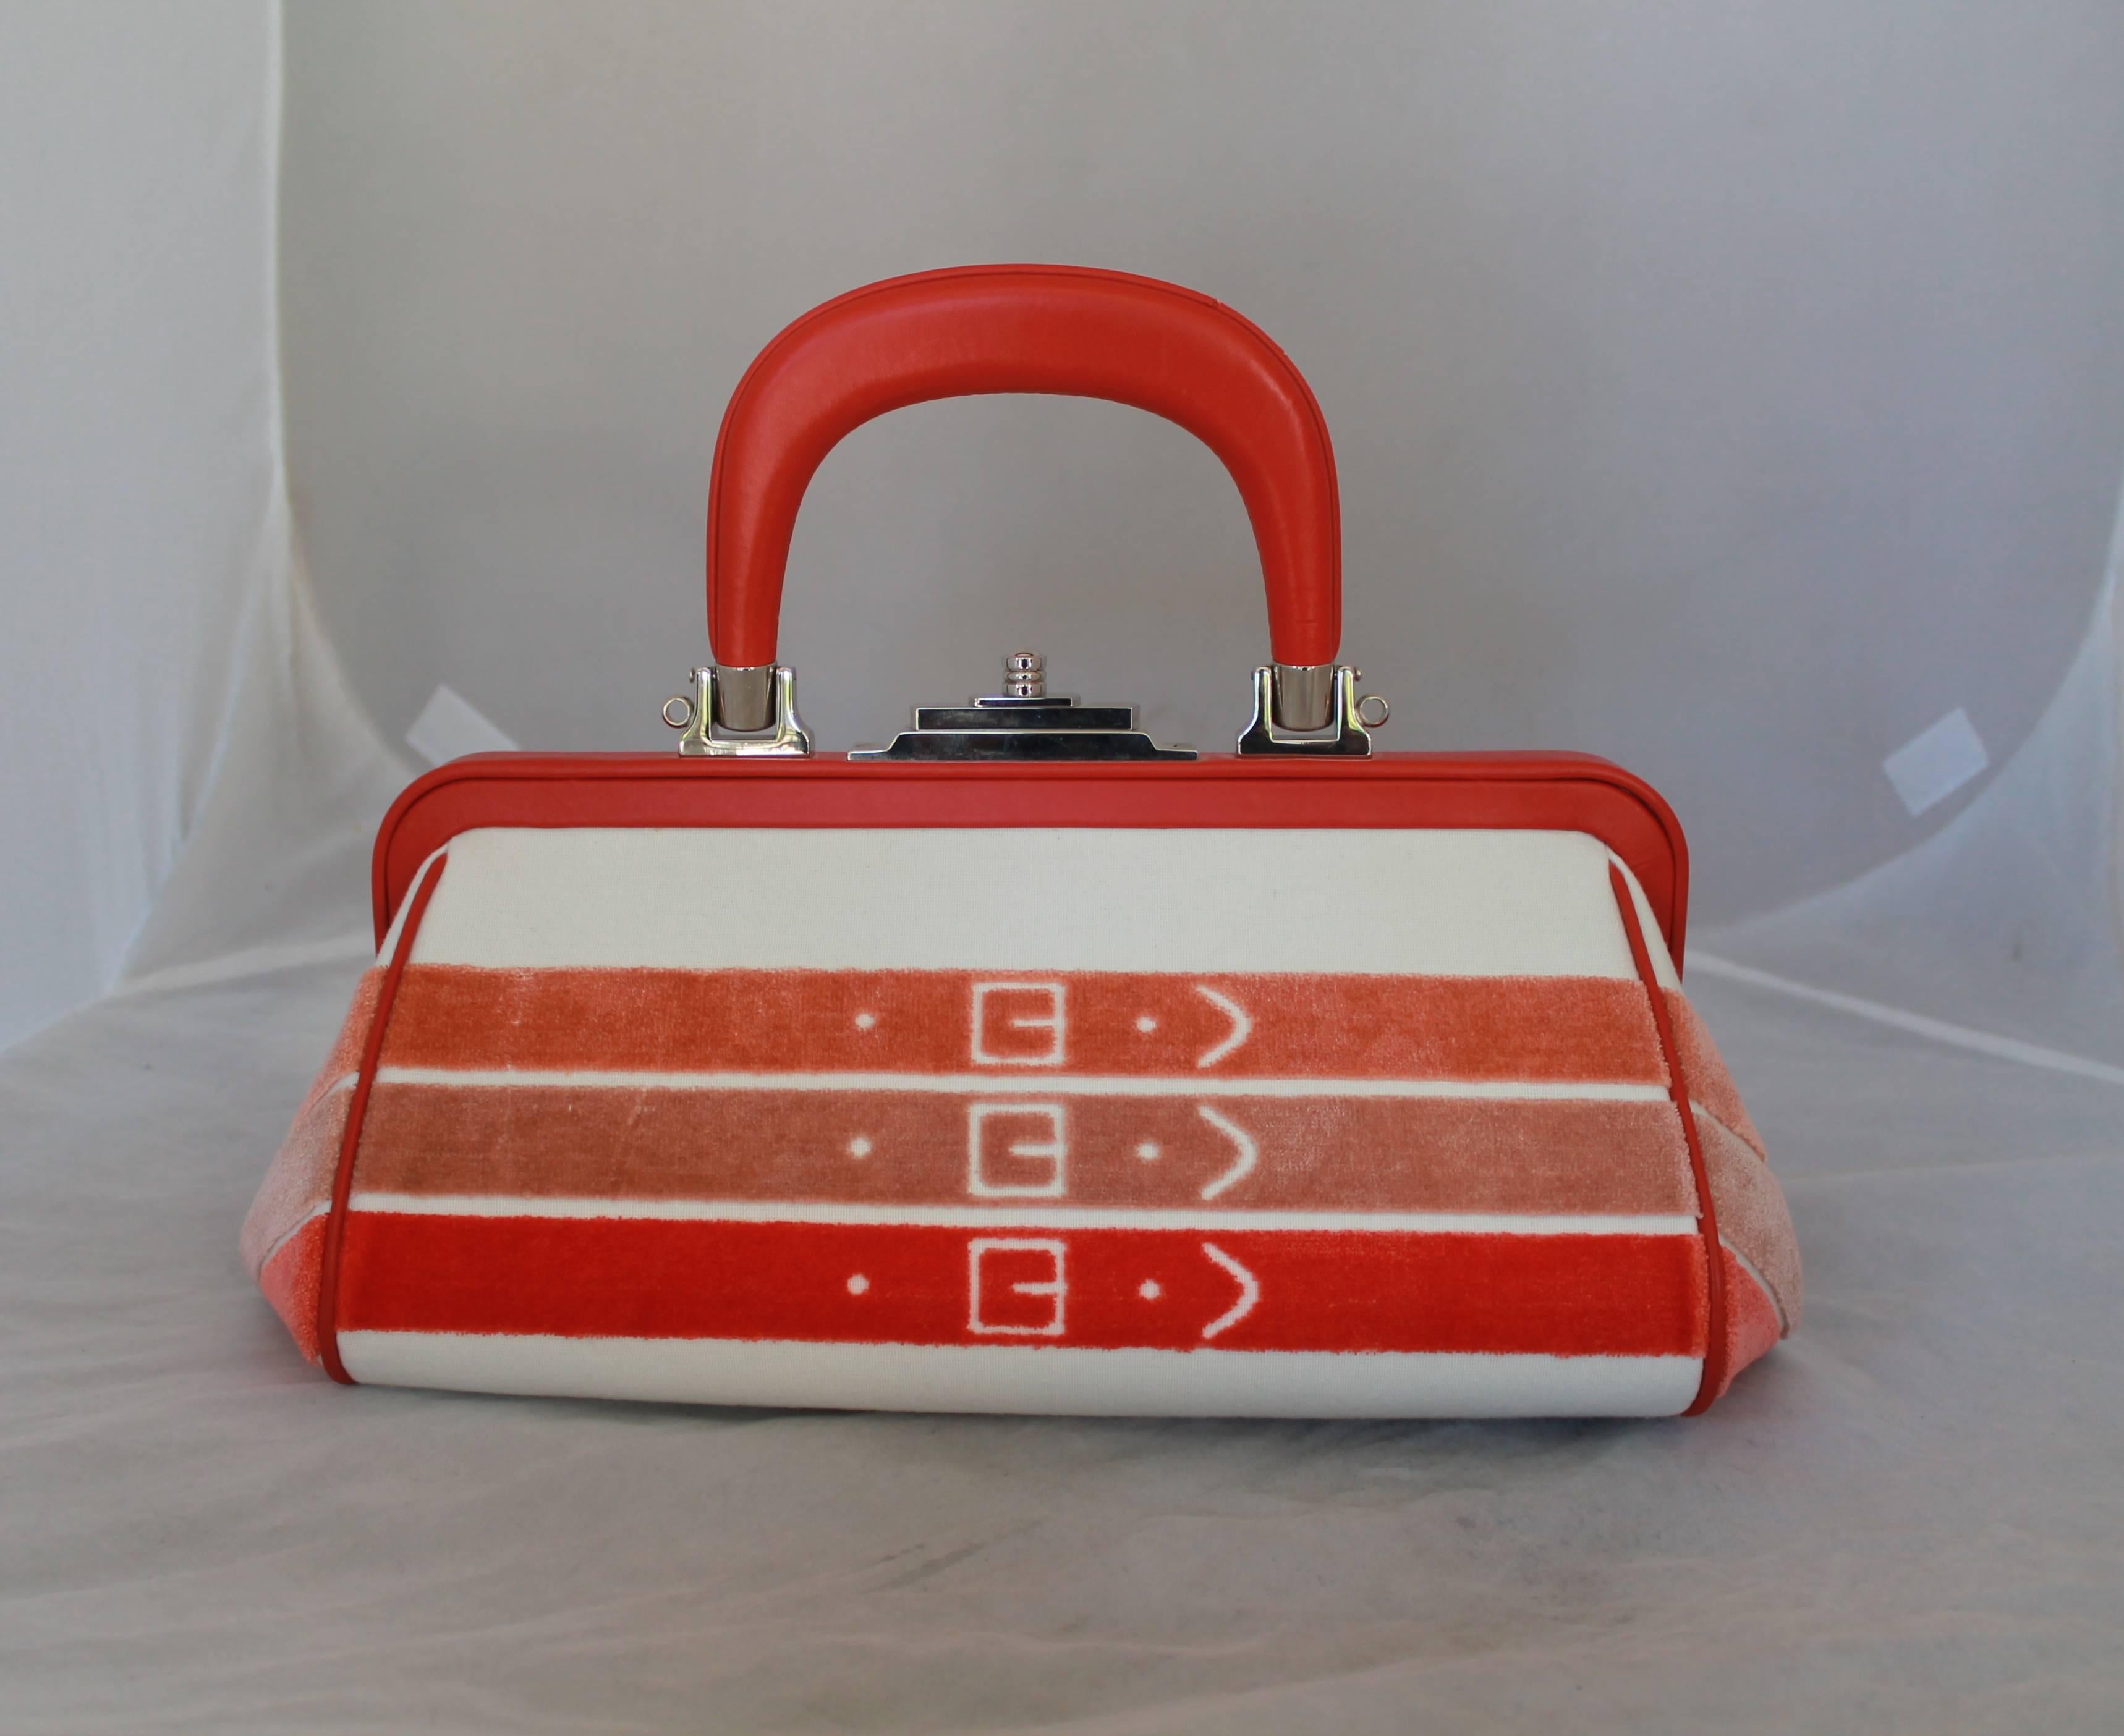 Roberta Di Camerino Orange and White Velvet Handbag

This bag is in excellent vintage condition. It is white and orange with velvet stripes and cotton fabric on top half. It has silver hardware and clasps shut. Also comes with strap to make into a